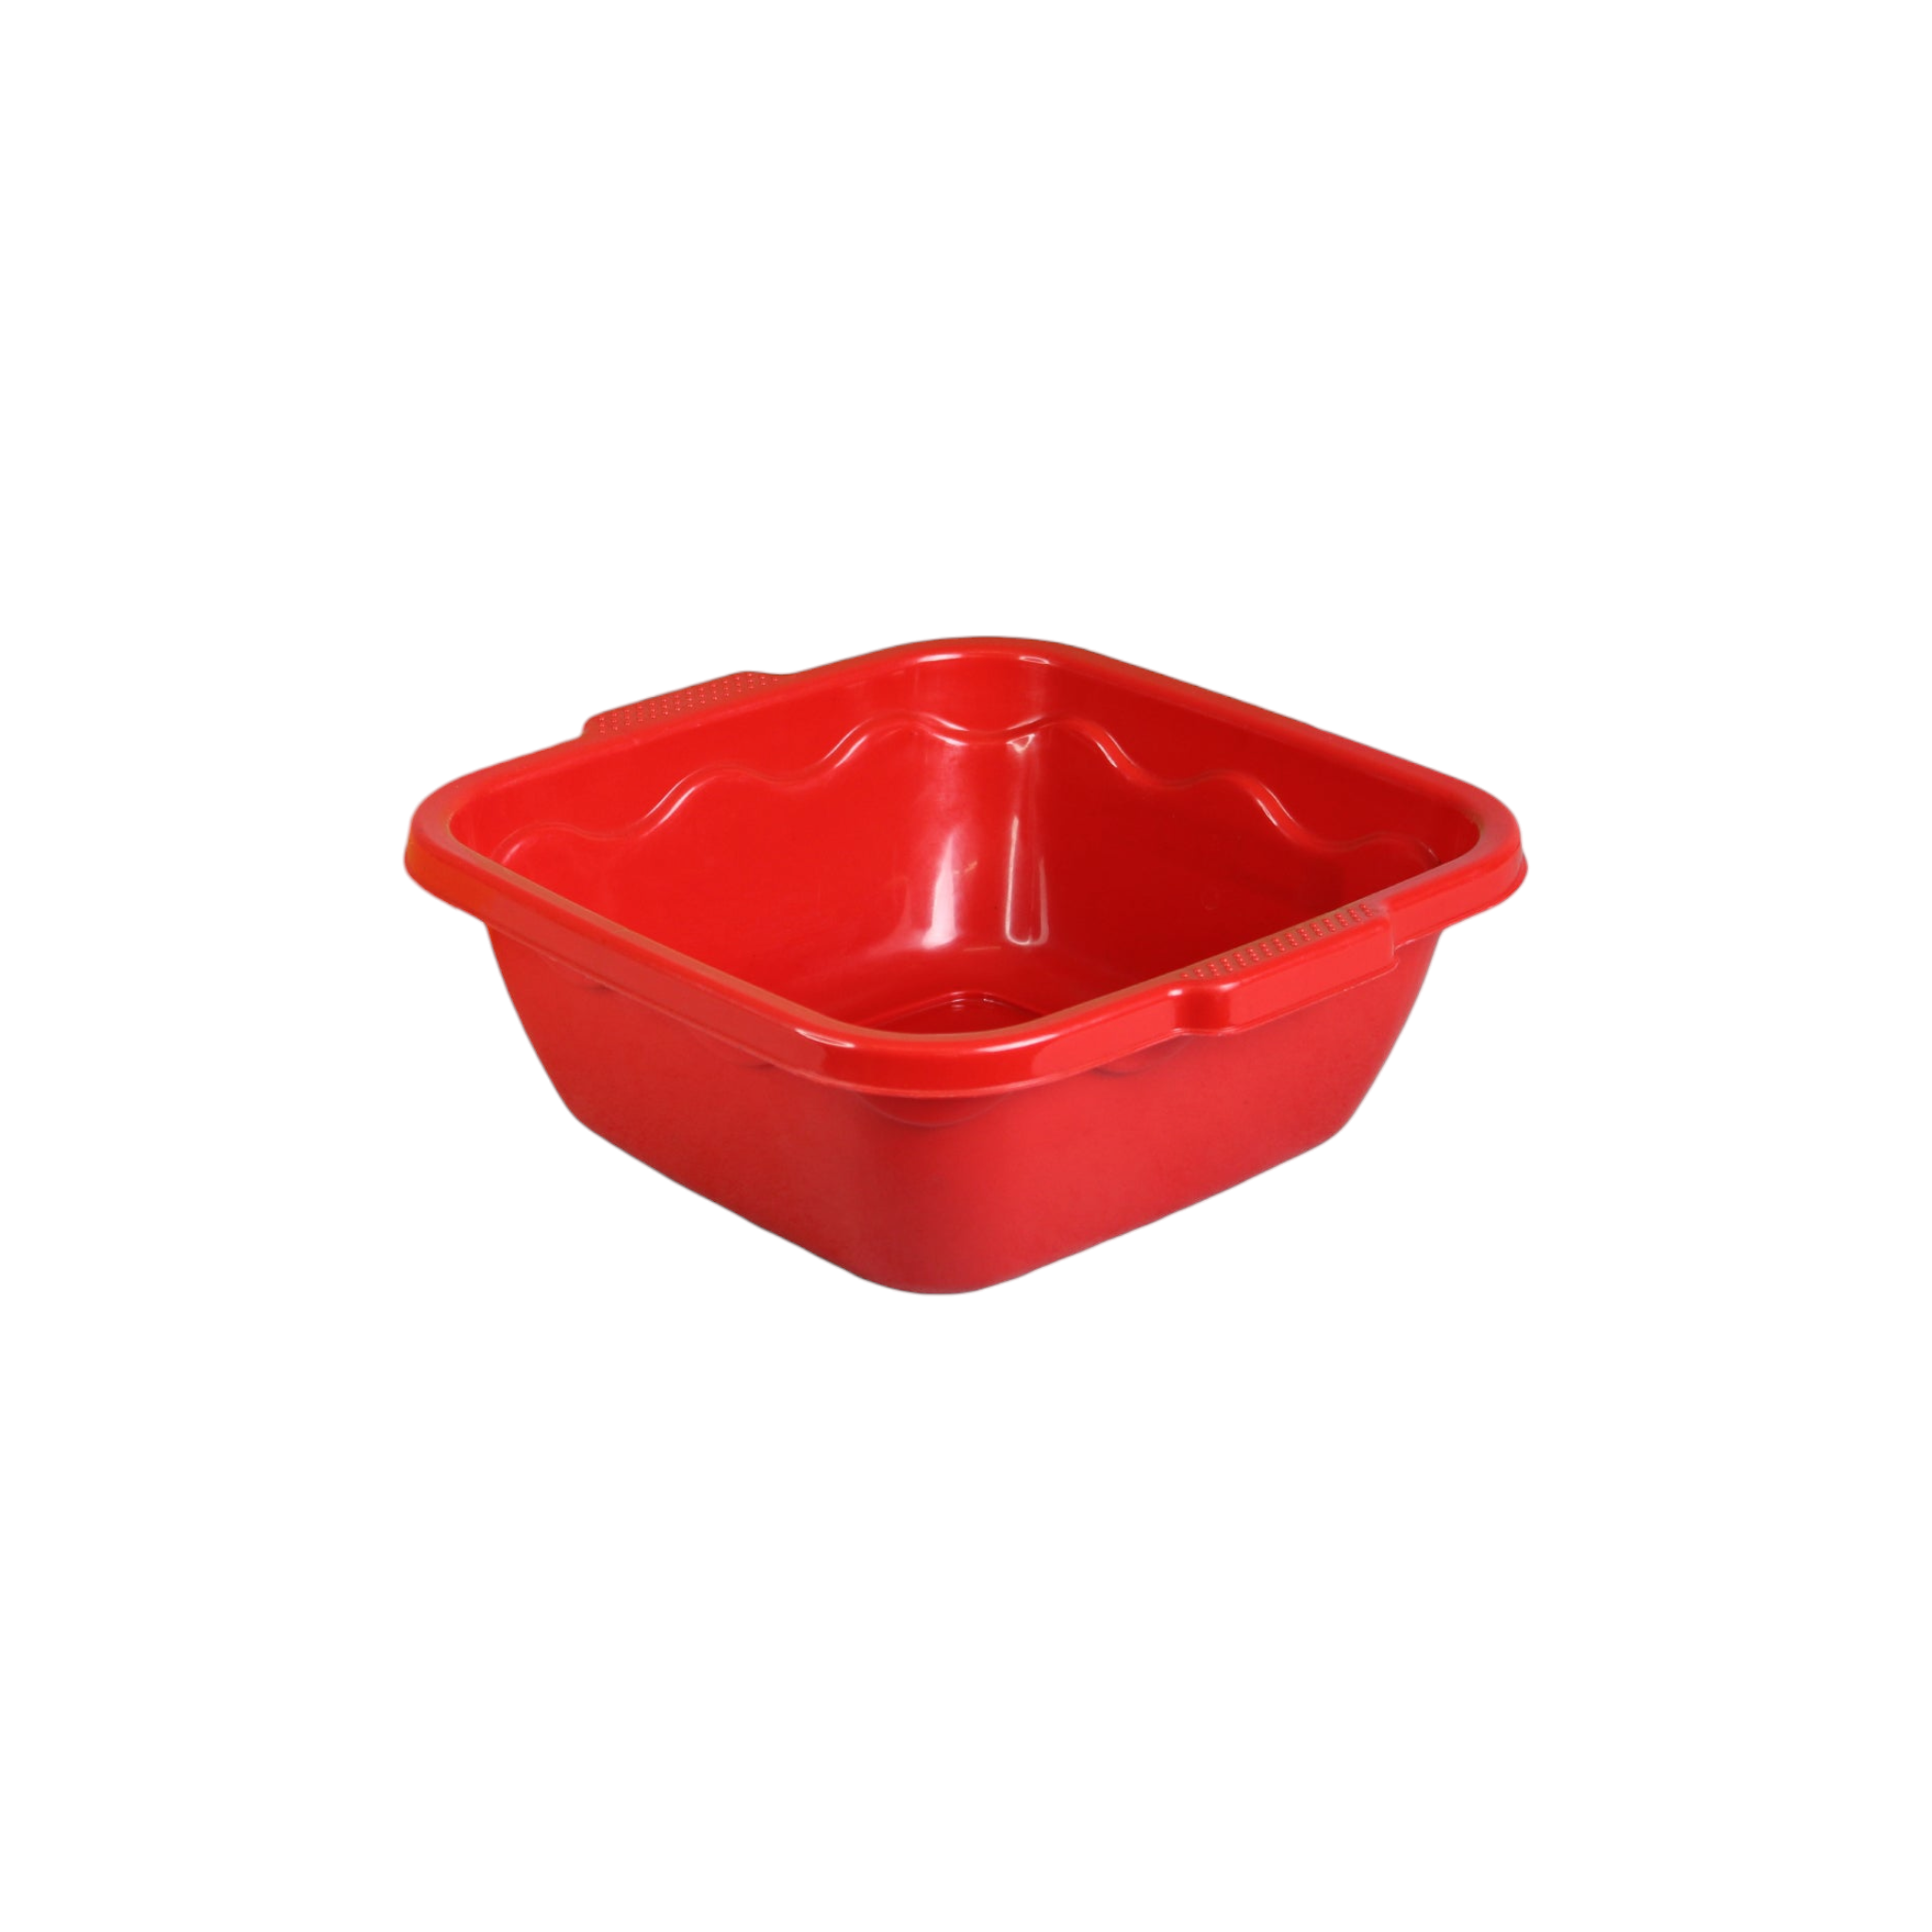 25cm Square Bowl Plastic Basin Recycled Nu Ware